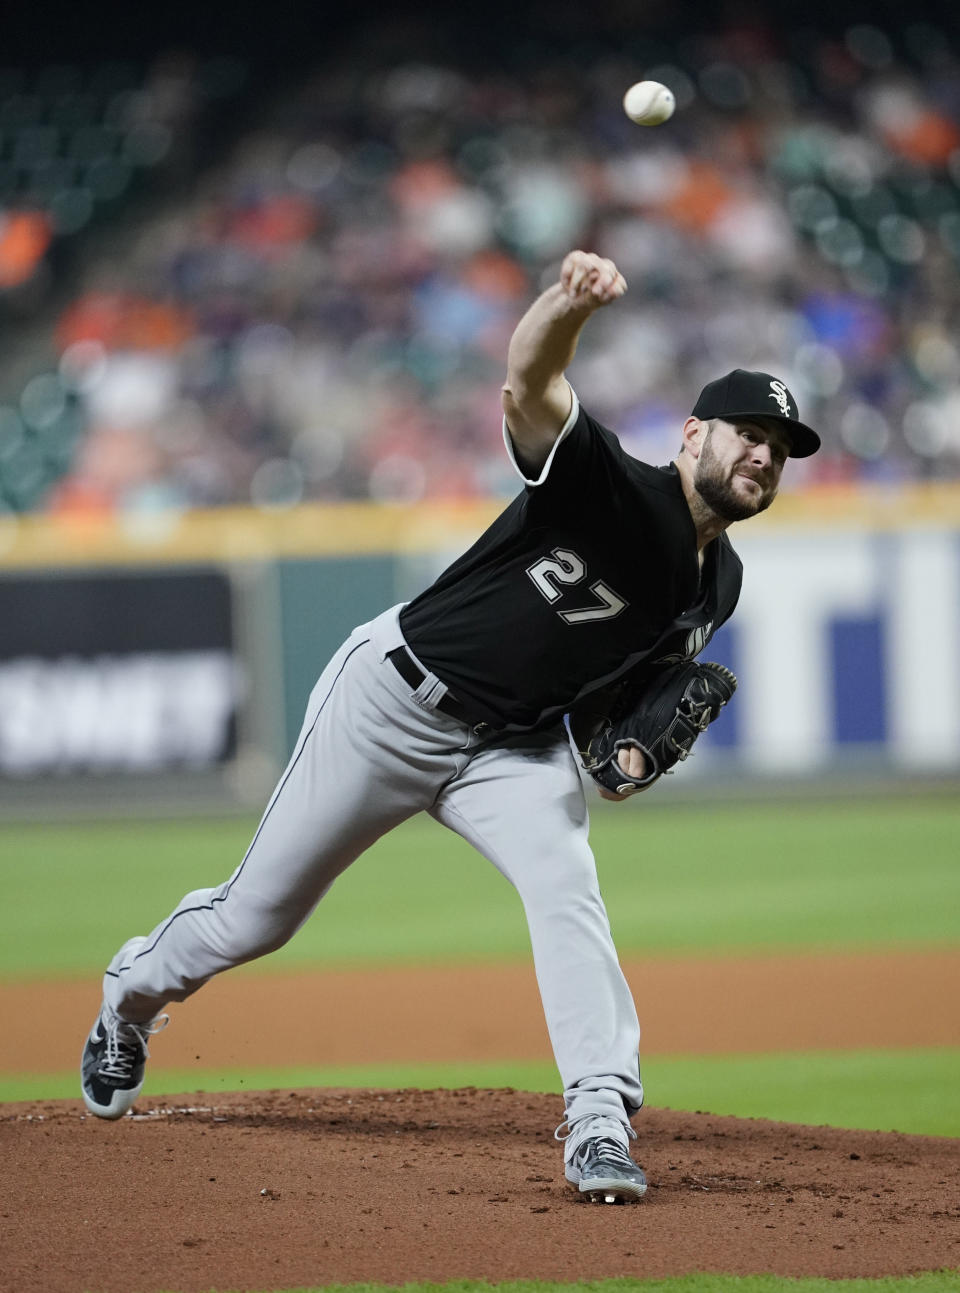 Chicago White Sox starting pitcher Lucas Giolito throws to a Houston Astros batter during the first inning of a baseball game Thursday, May 23, 2019, in Houston. (AP Photo/David J. Phillip)